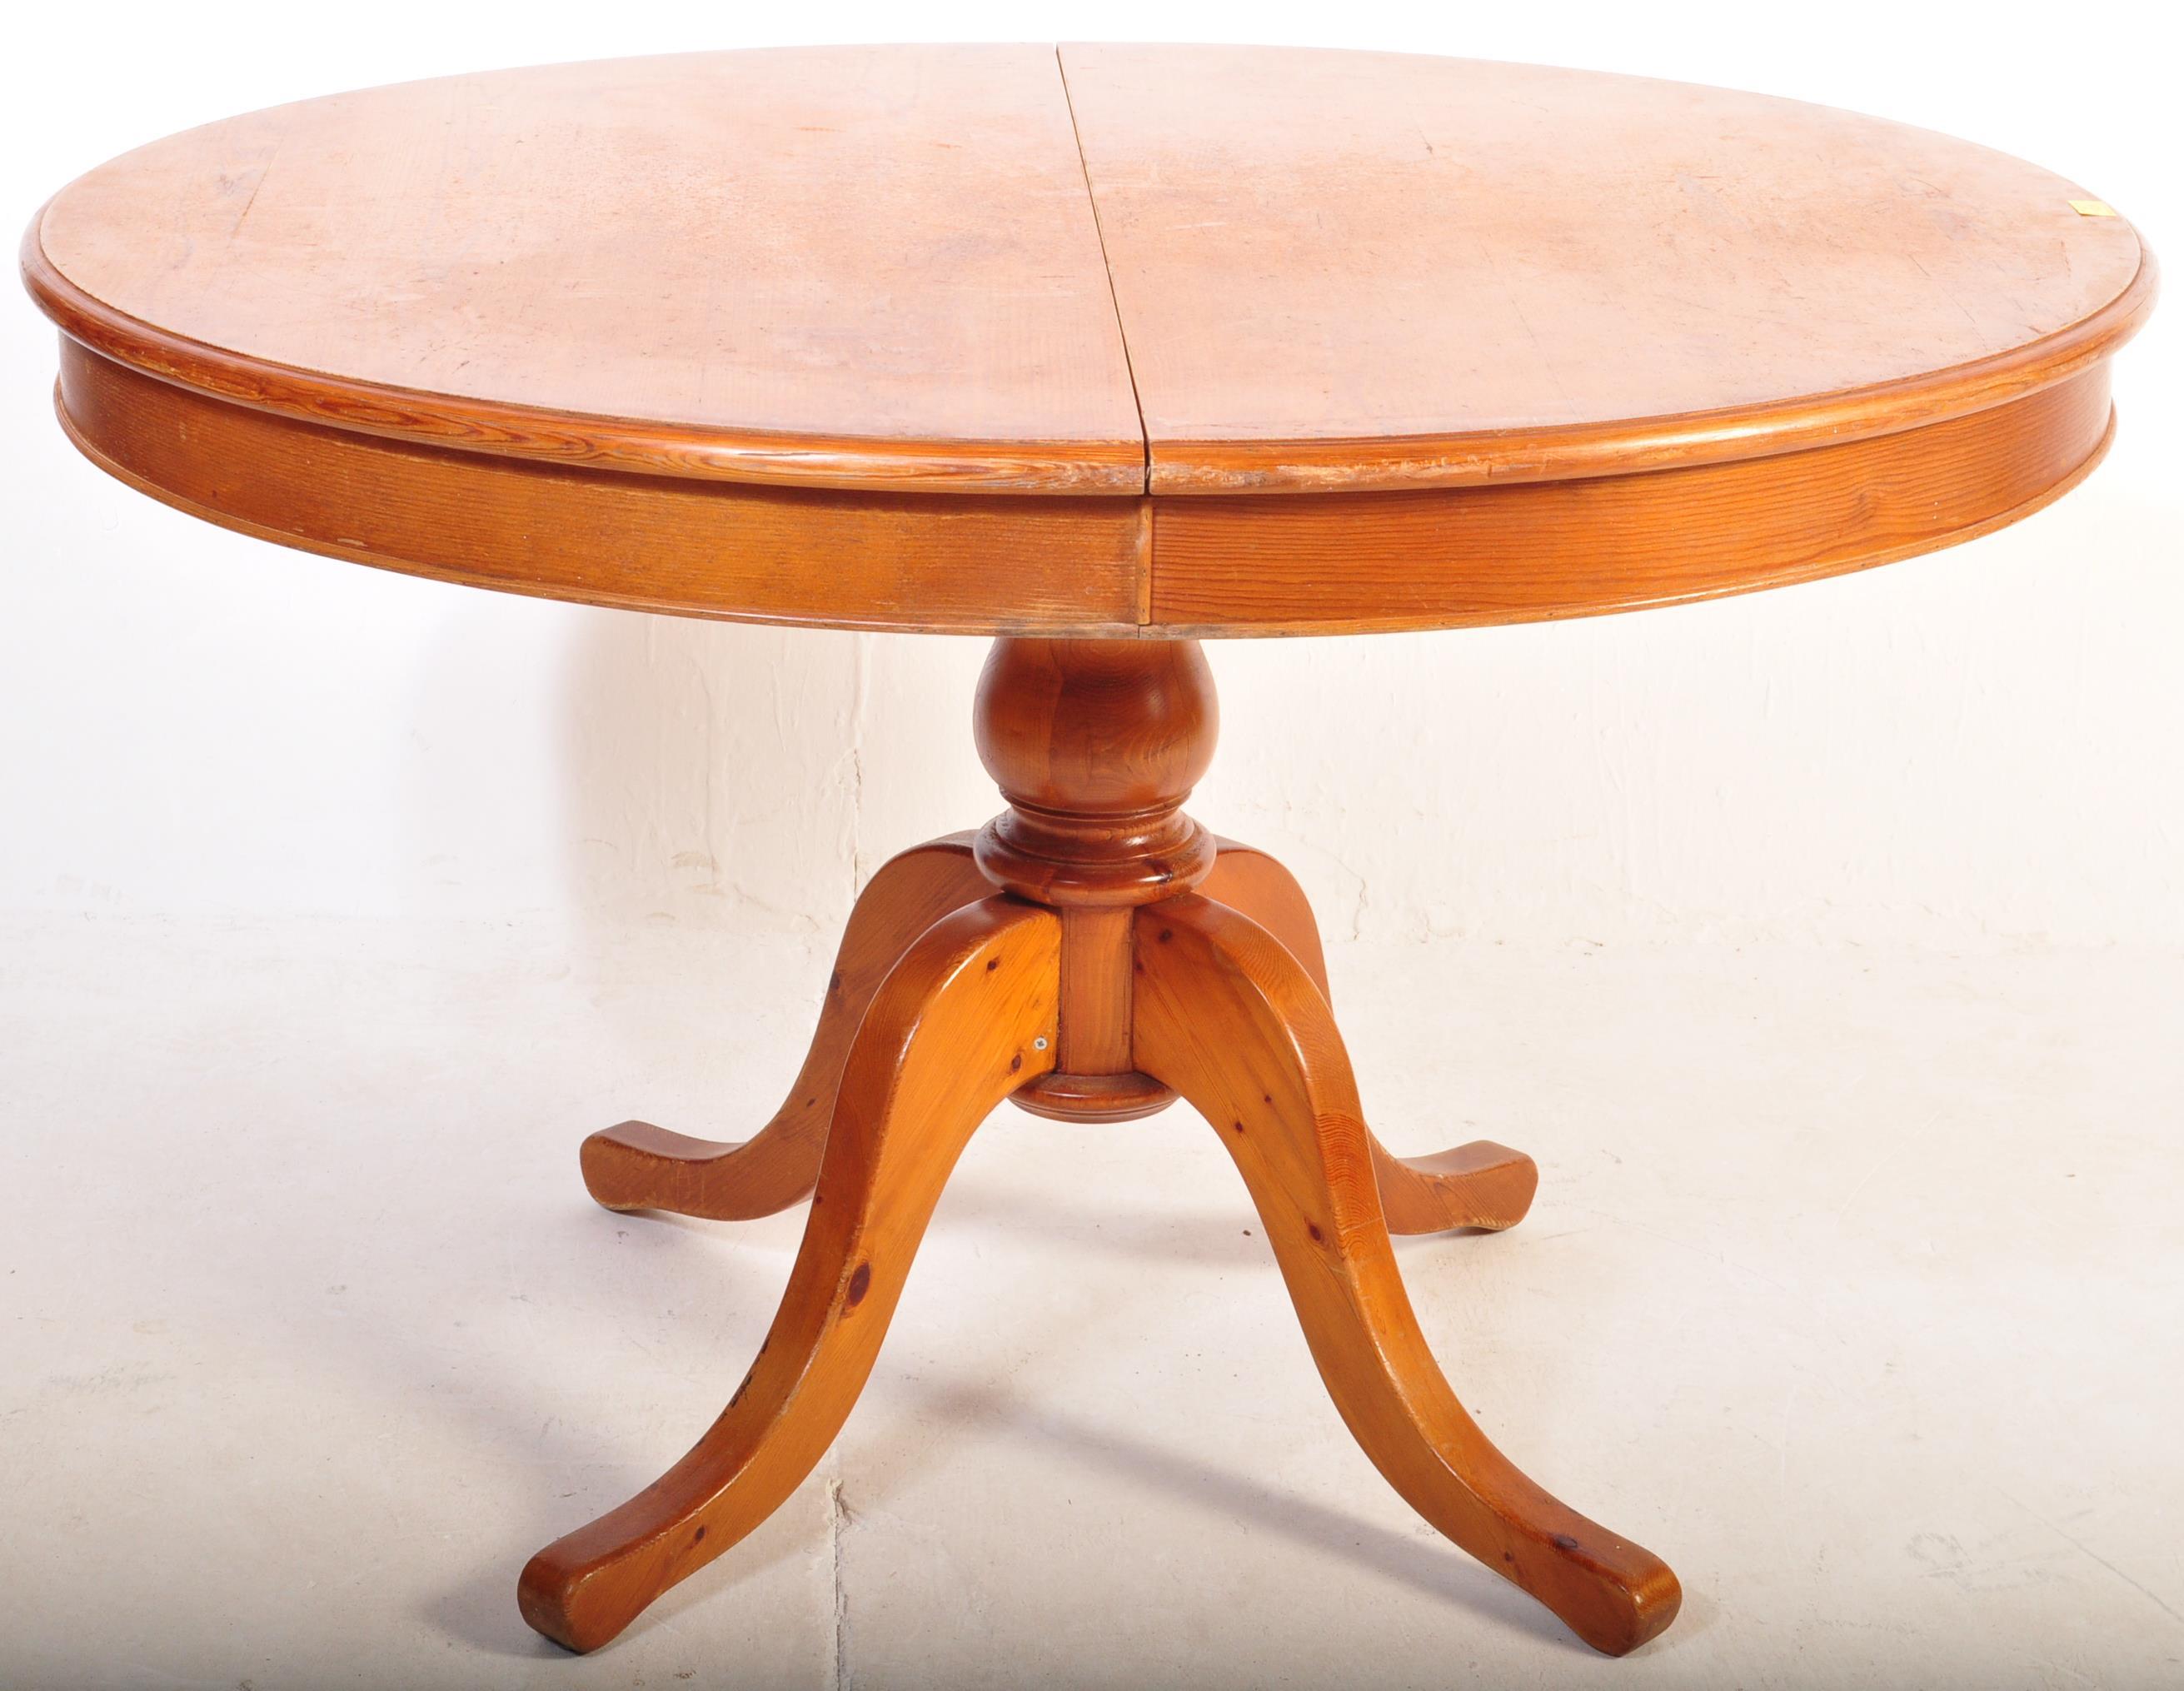 20TH CENTURY COUNTRY PINE EXTENDABLE DINING TABLE - Image 2 of 8